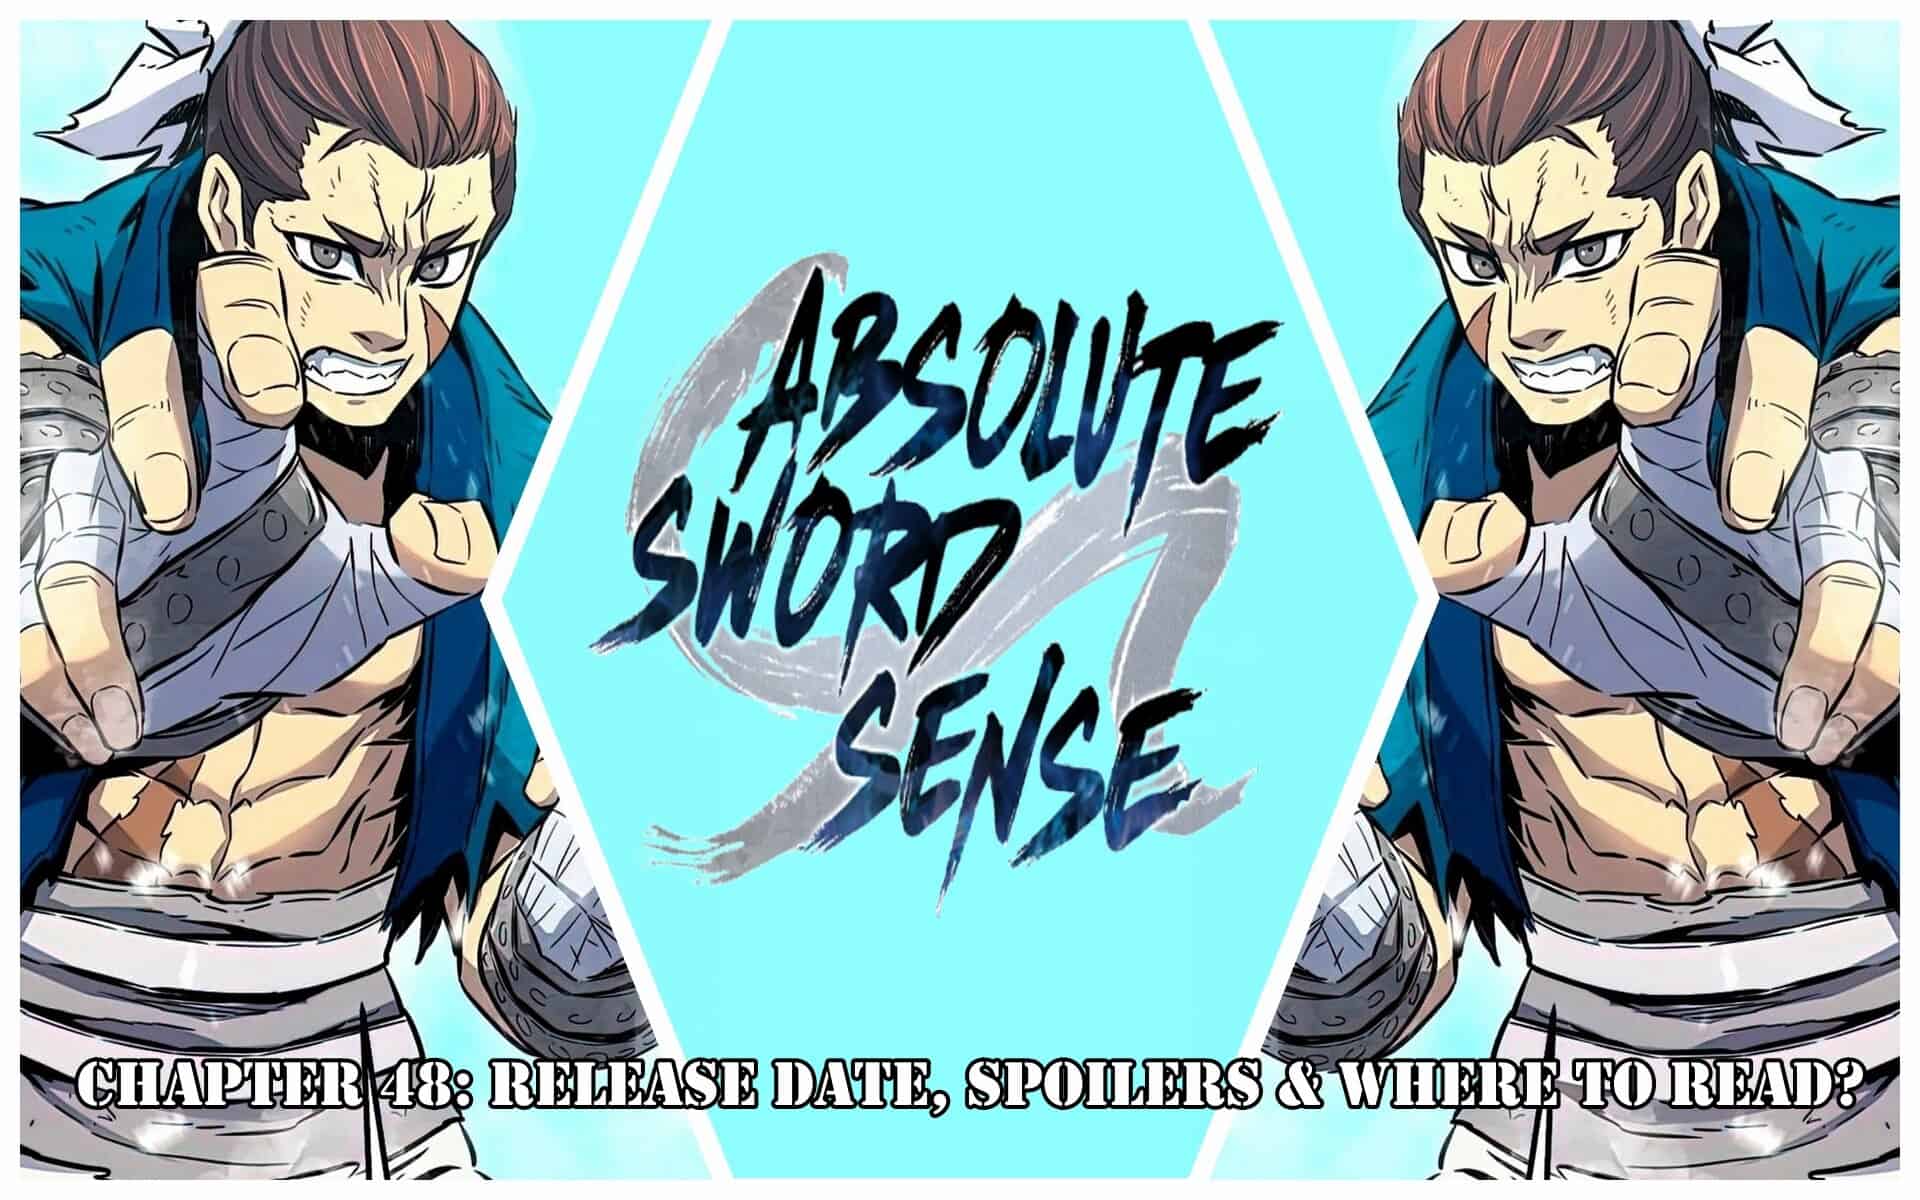 Absolute Sword Sense Chapter 48: Release Date, Spoilers & Where to Read?